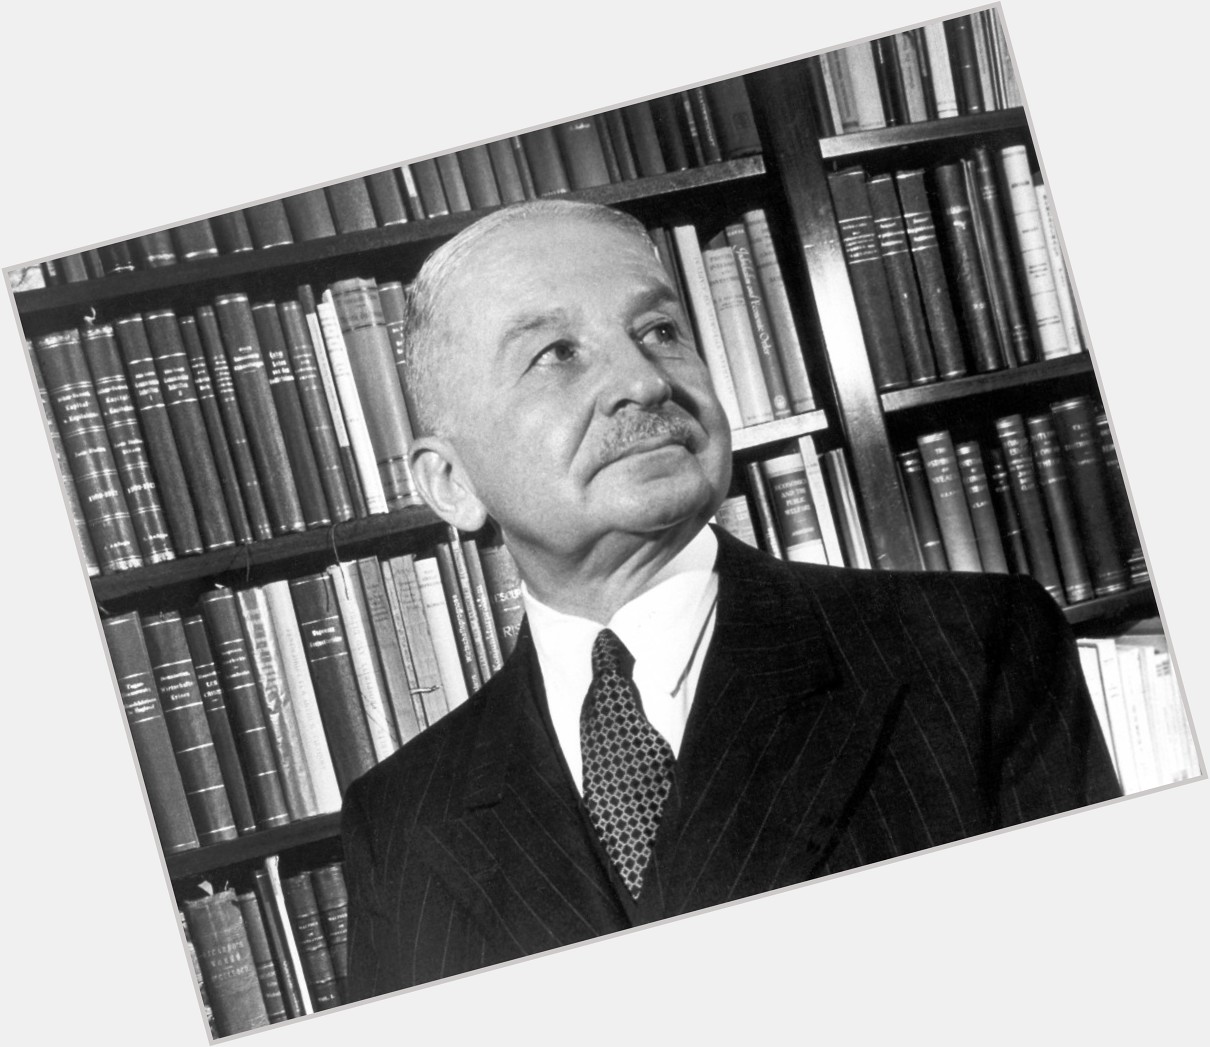 <a href="/hot-men/ludwig-von-mises/where-dating-news-photos">Ludwig Von Mises</a> Average body,  